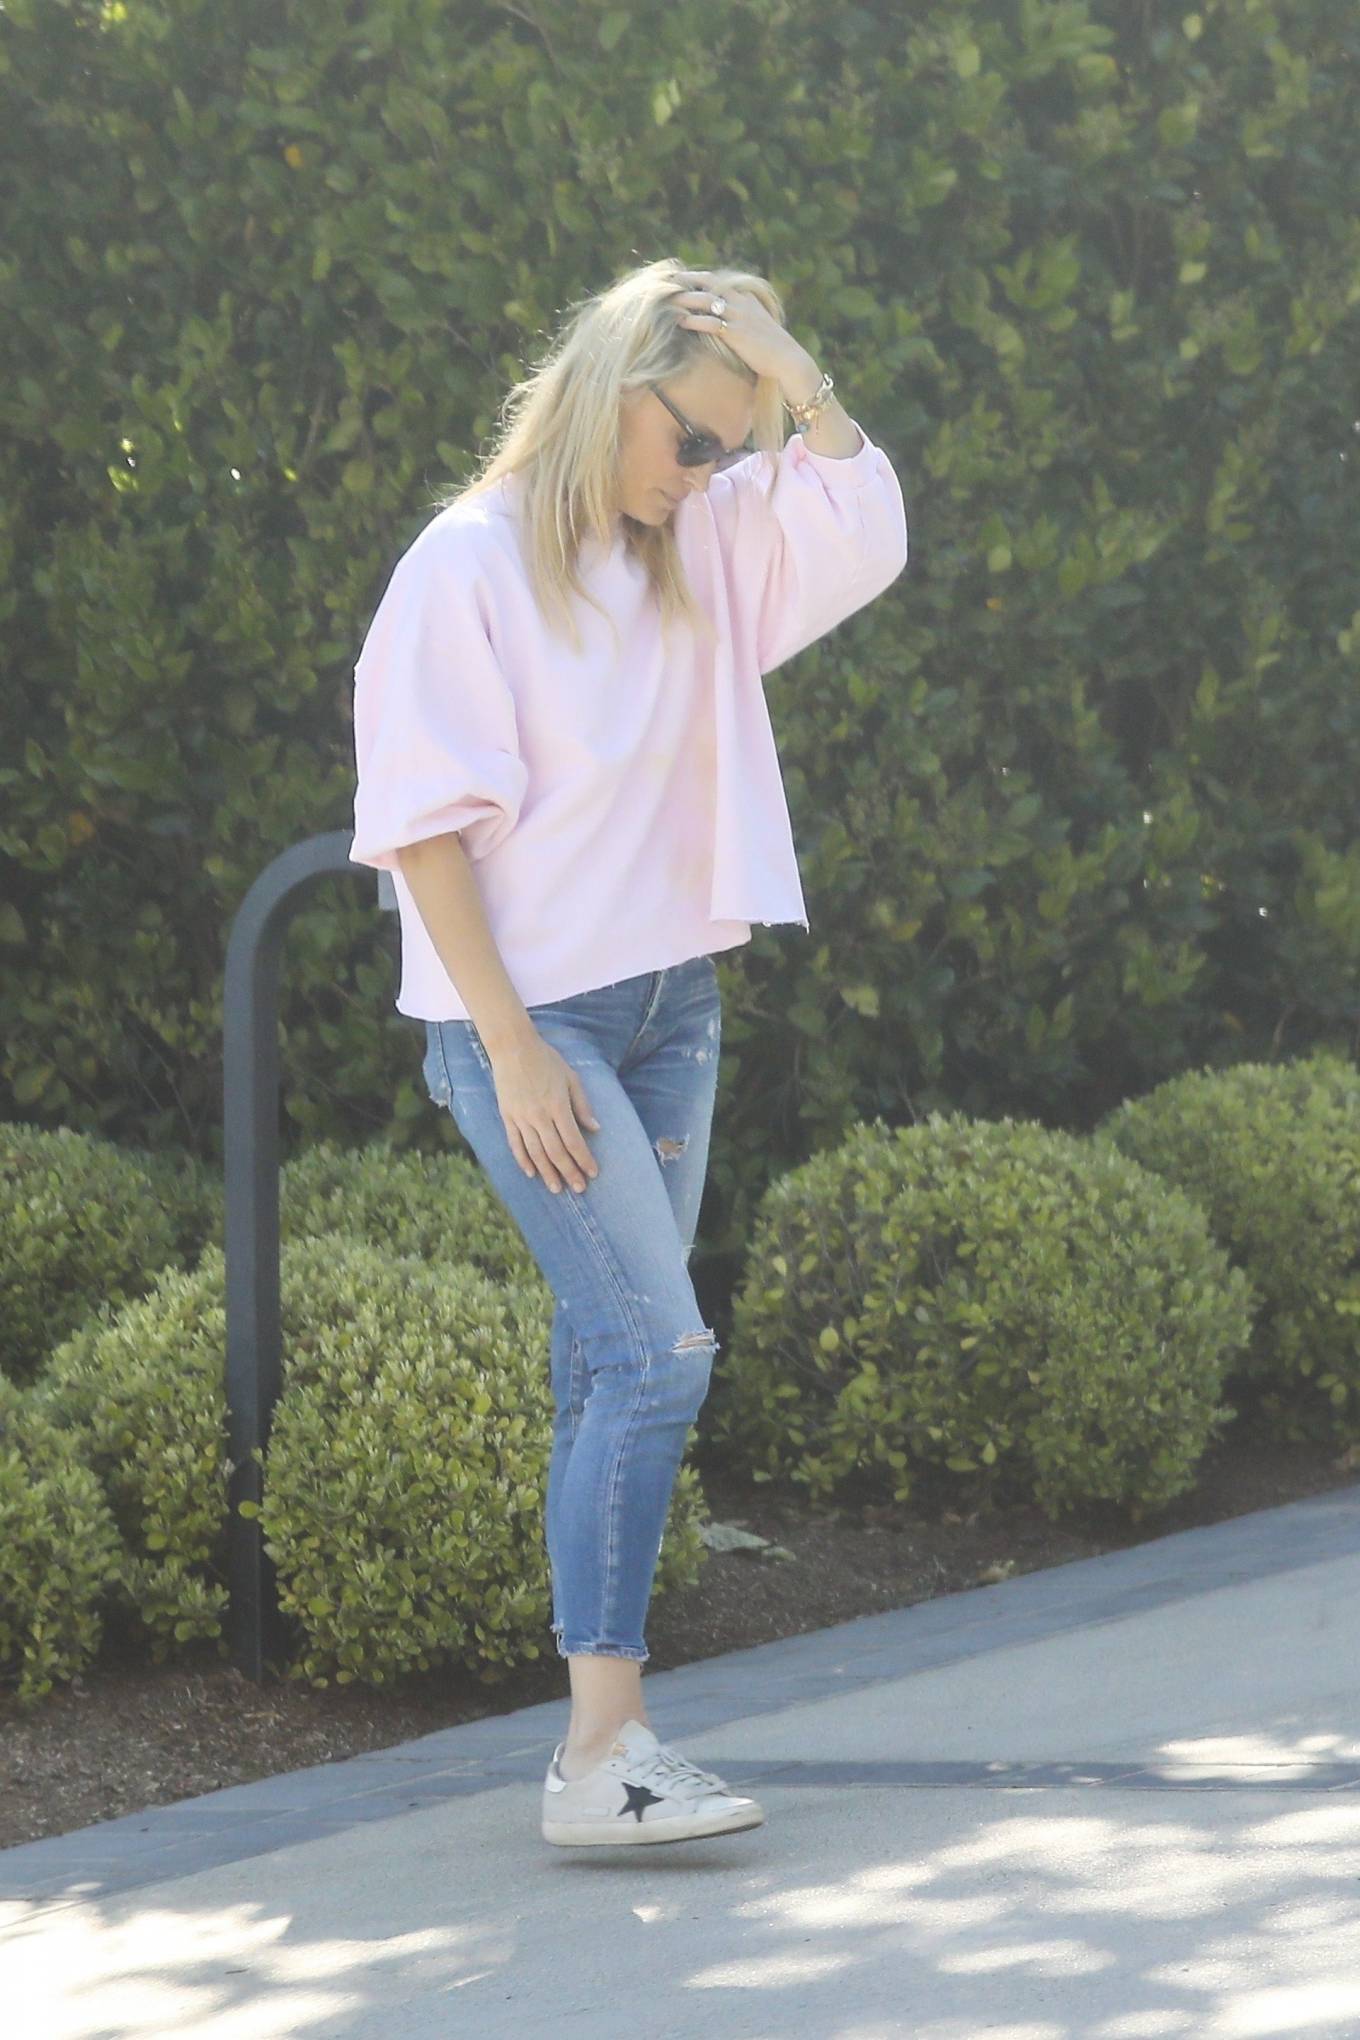 Molly Sims â€“ Pictured at her home